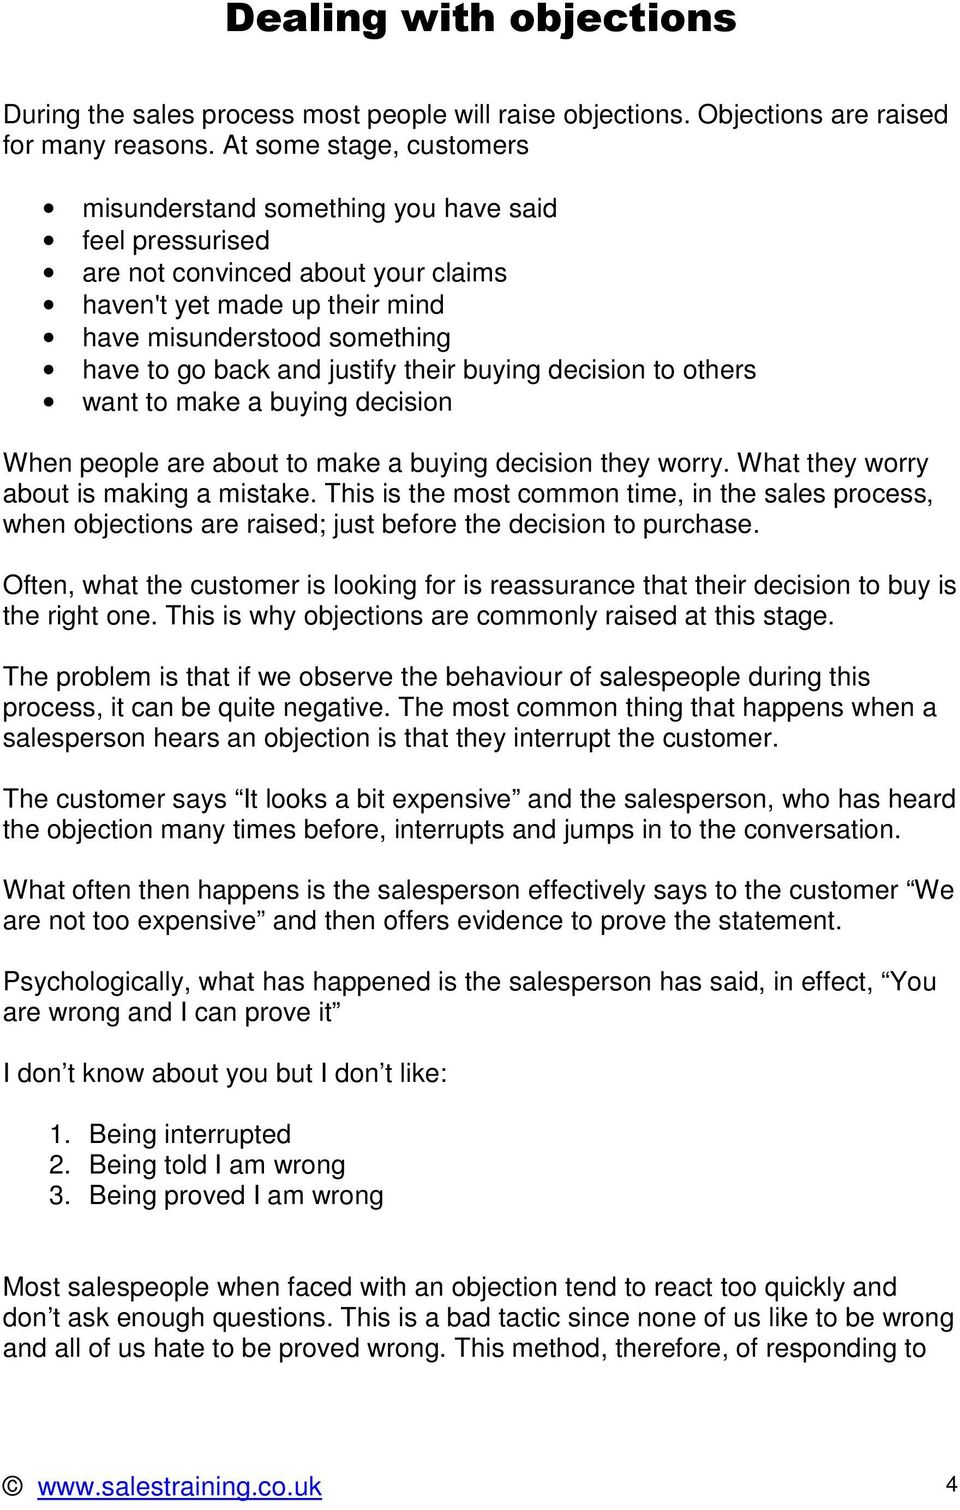 justify their buying decision to others want to make a buying decision When people are about to make a buying decision they worry. What they worry about is making a mistake.